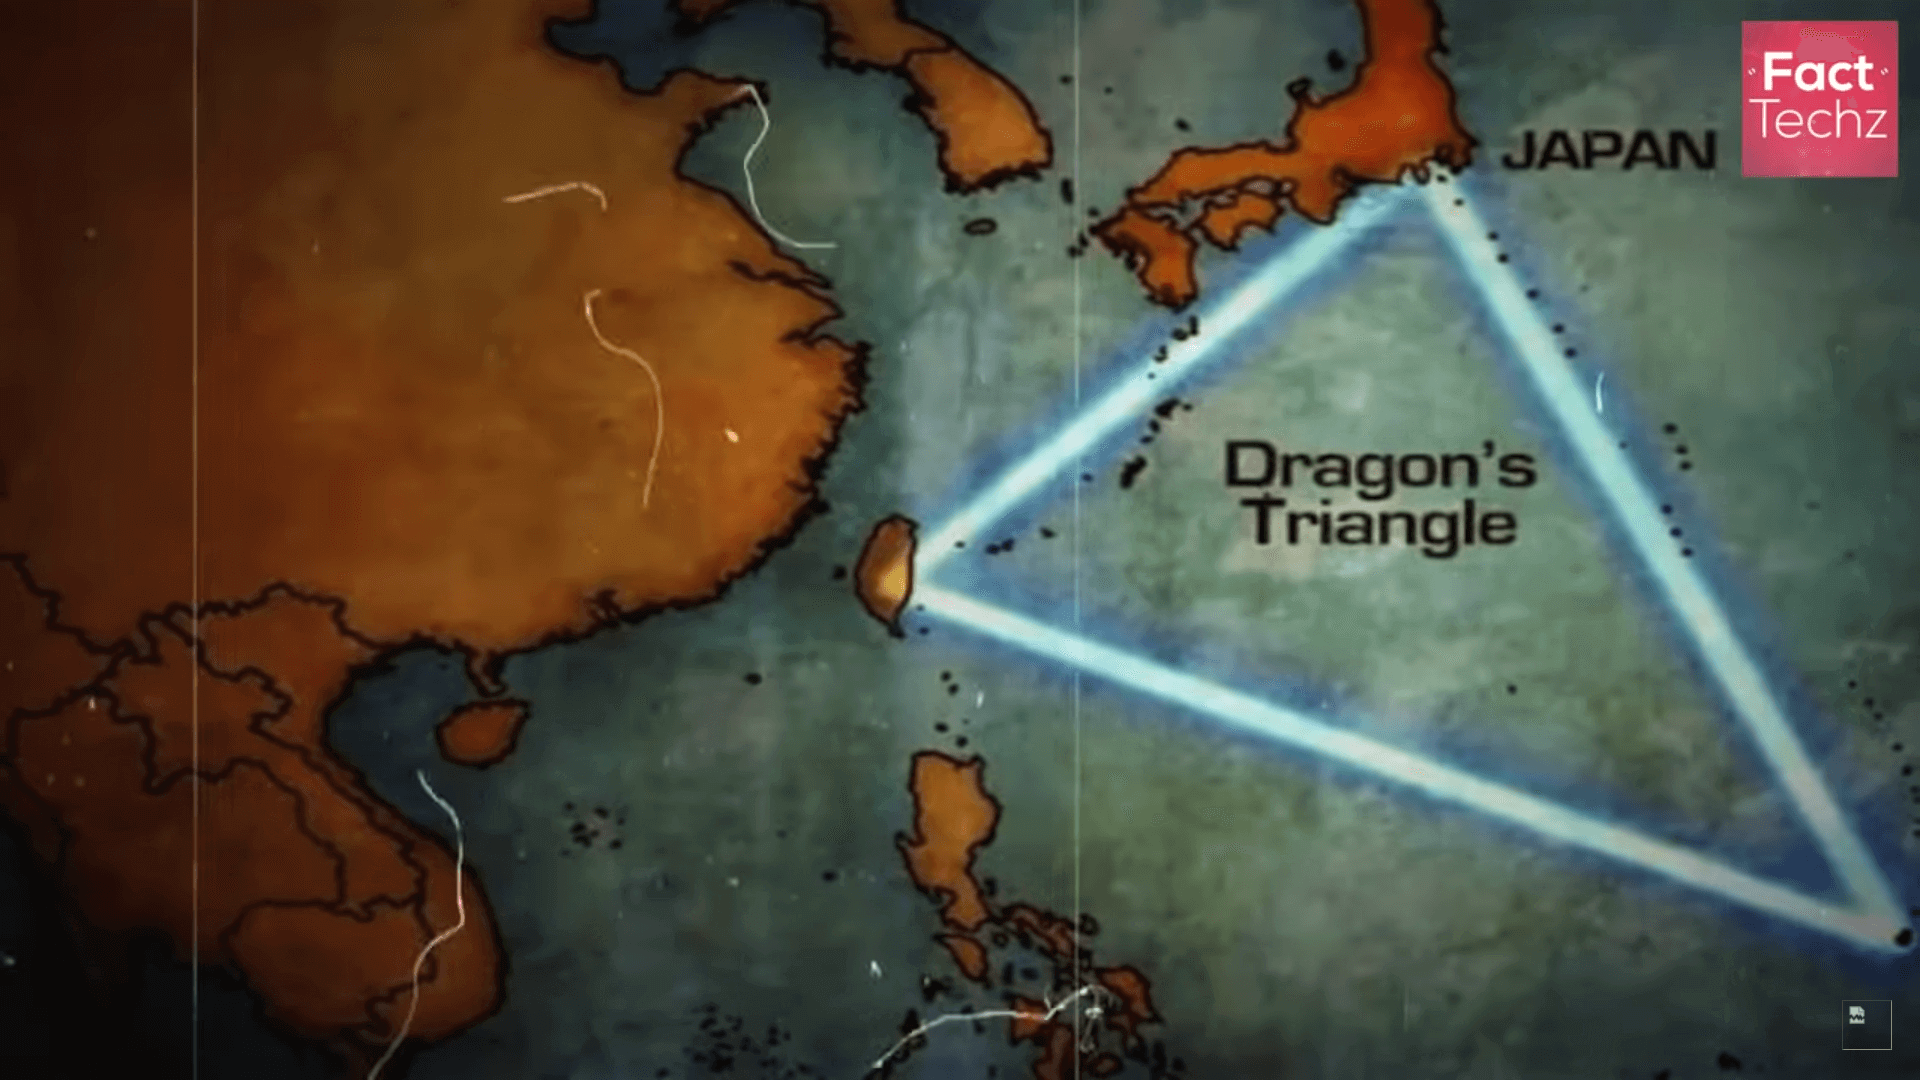 the triangle formed in the japan sea by the devils triangle.